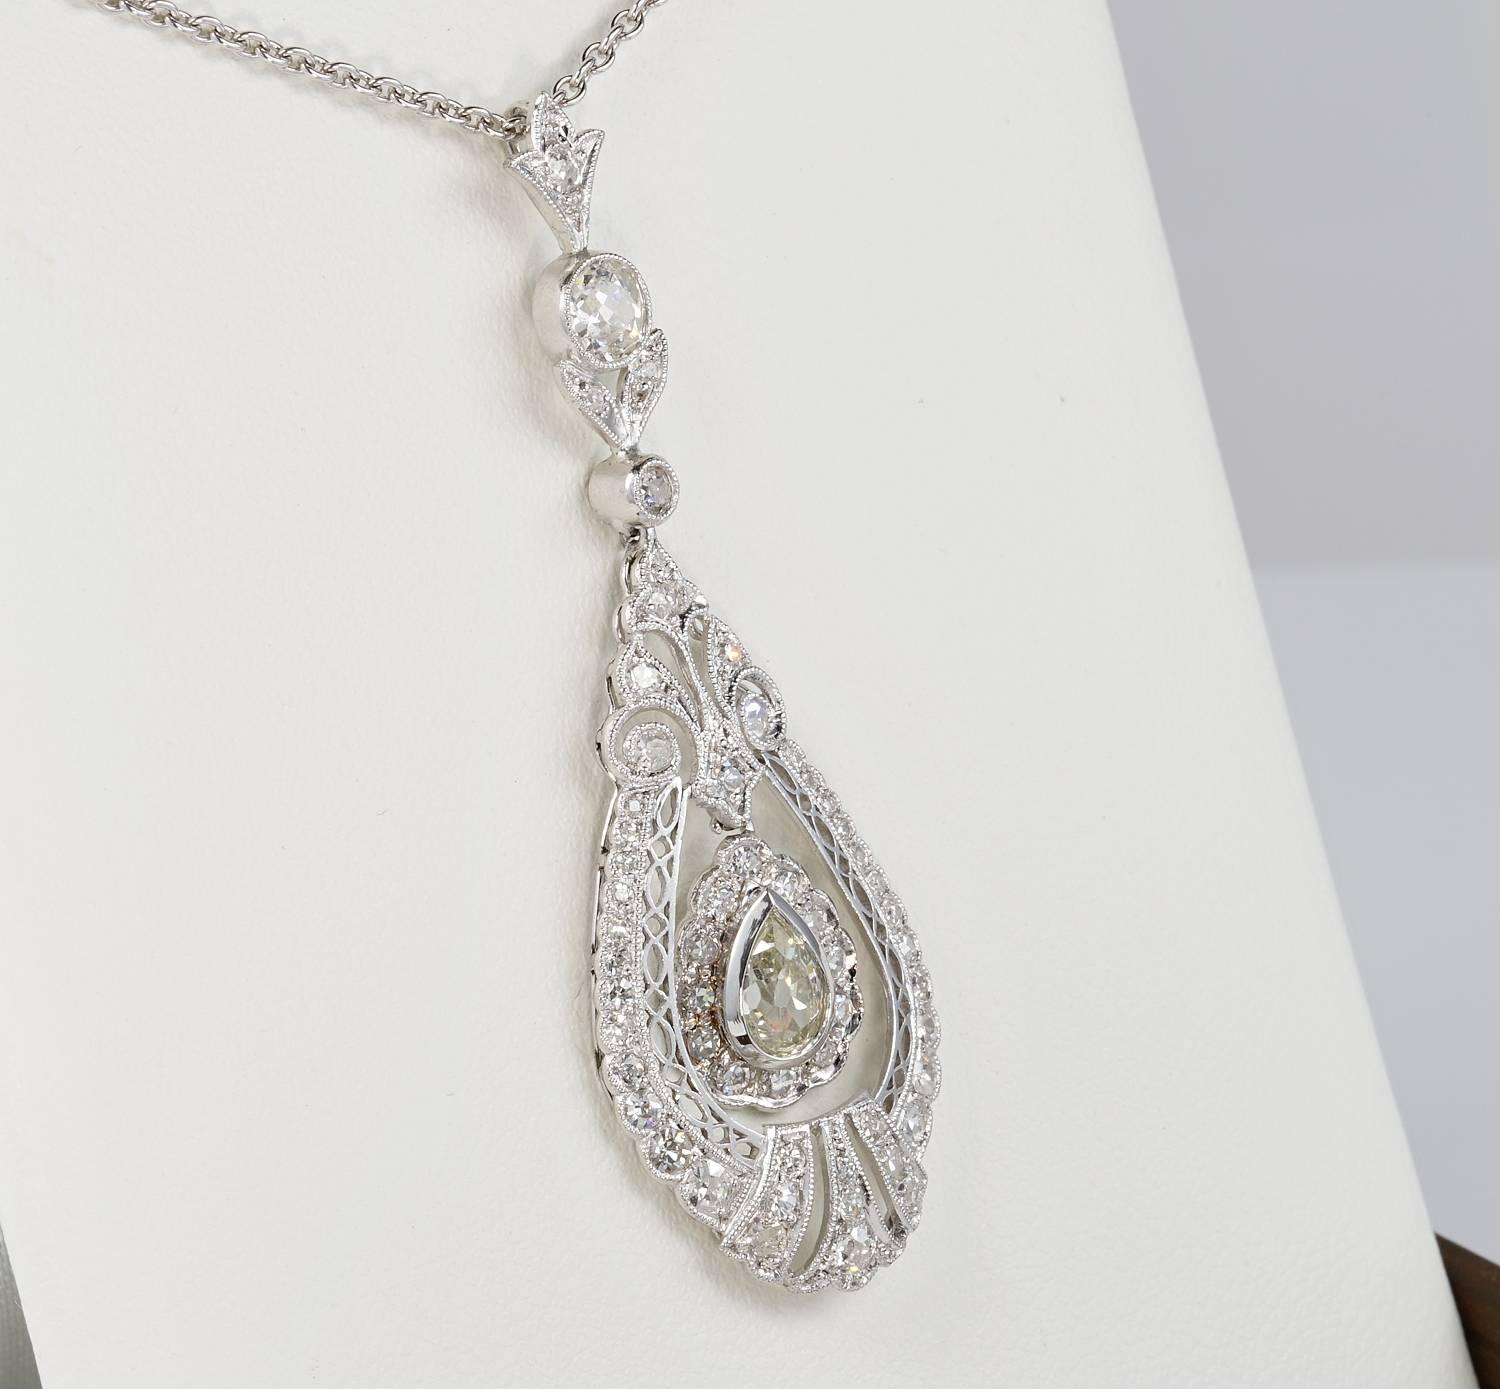 Divine!

Edwardian distinctive jewellery is highly rewarded for refinement and grace expressed in articulated hand craftsmanship and design
This exceptional pendant necklace is a magnificent example of that era with greatest quality will surpass